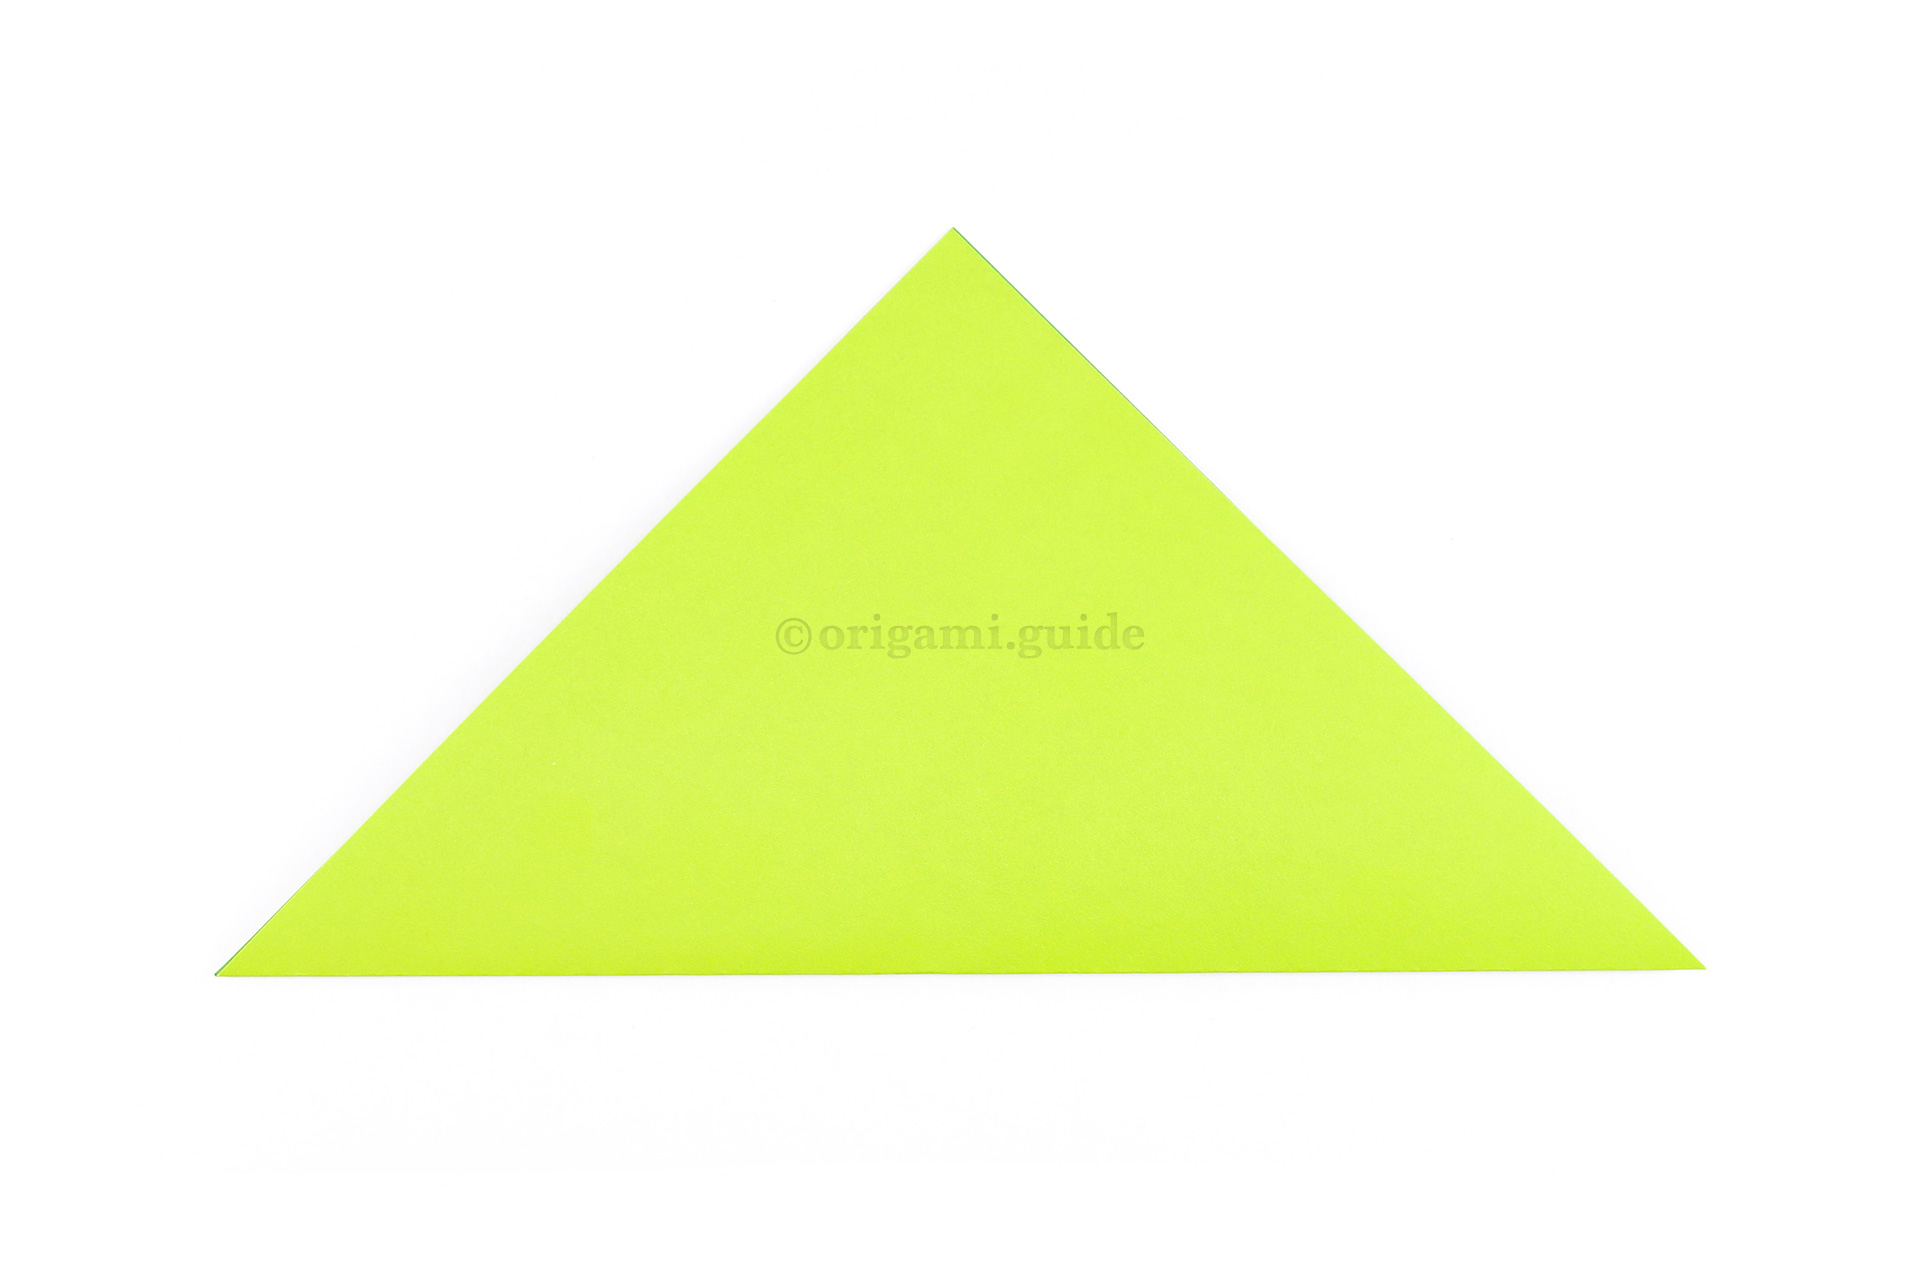 Fold the paper diagonally in half so that you have a triangle shape.